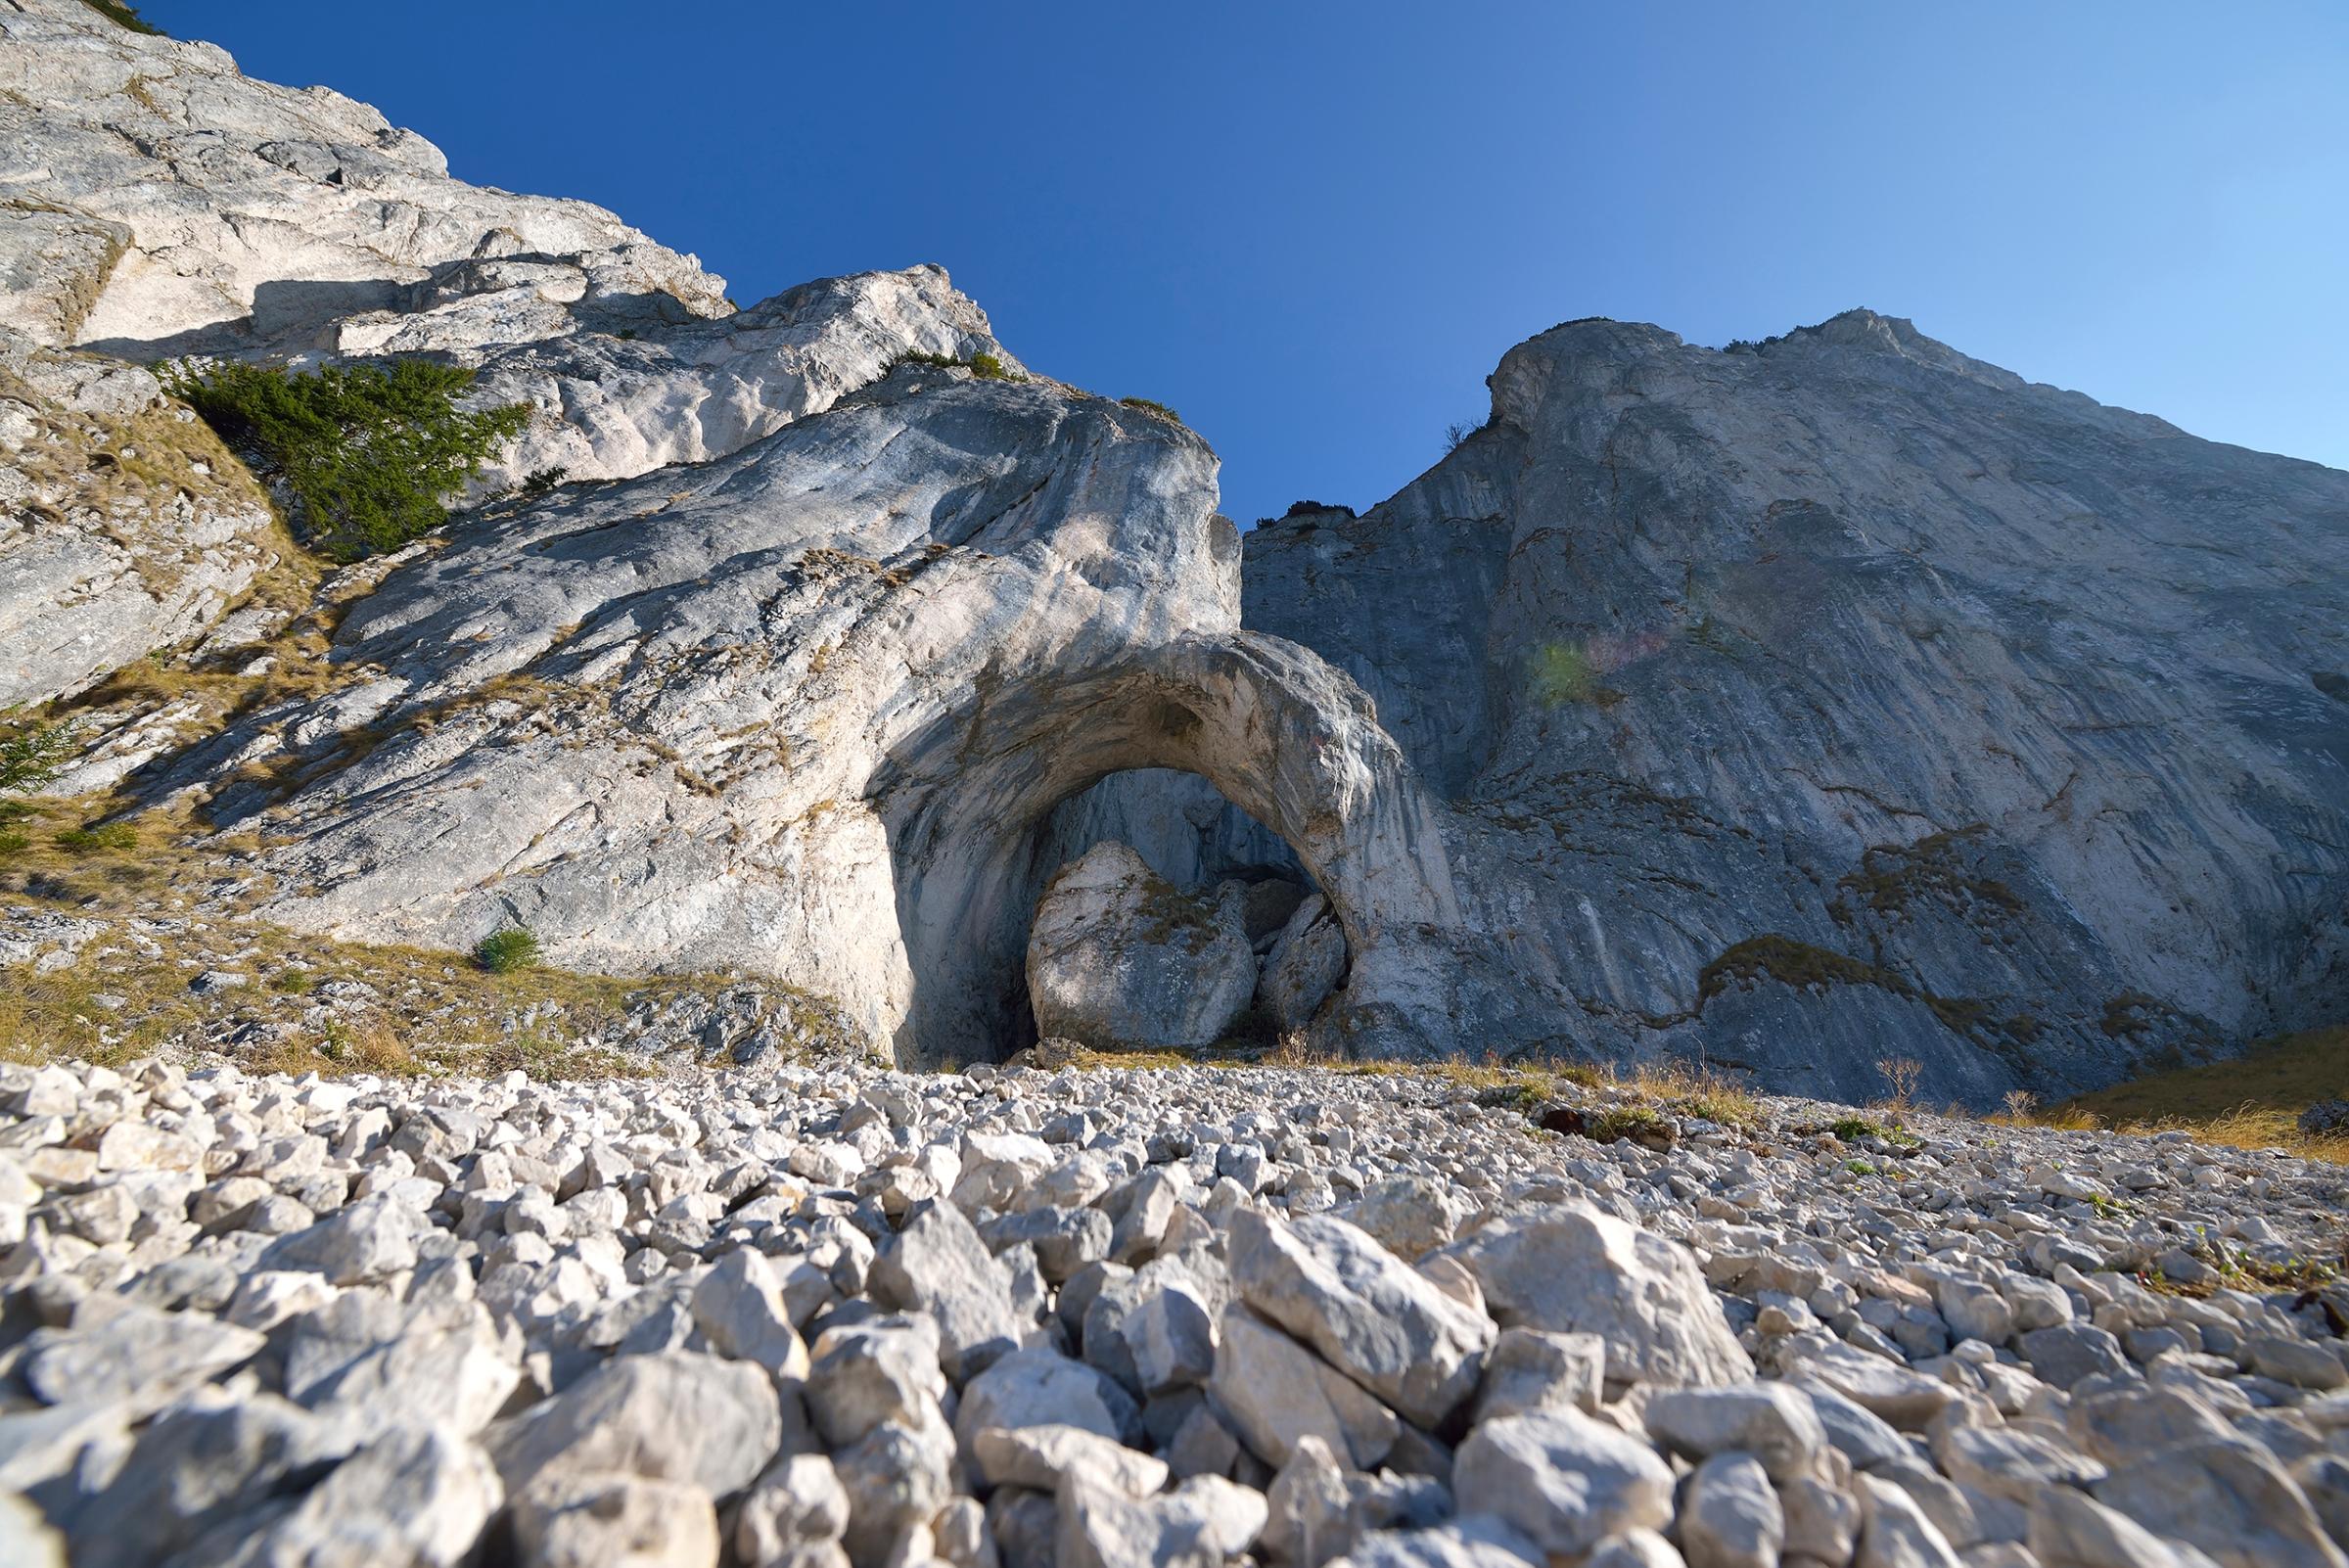 Cerdacul Stanciului cave, Piatra Craiului National Park, Romania. This park, whose name translate to "prince's stone" contains the southern Carpathian mountains. Bordered by glacial lakes, water has carved out a series of caves into the rock.